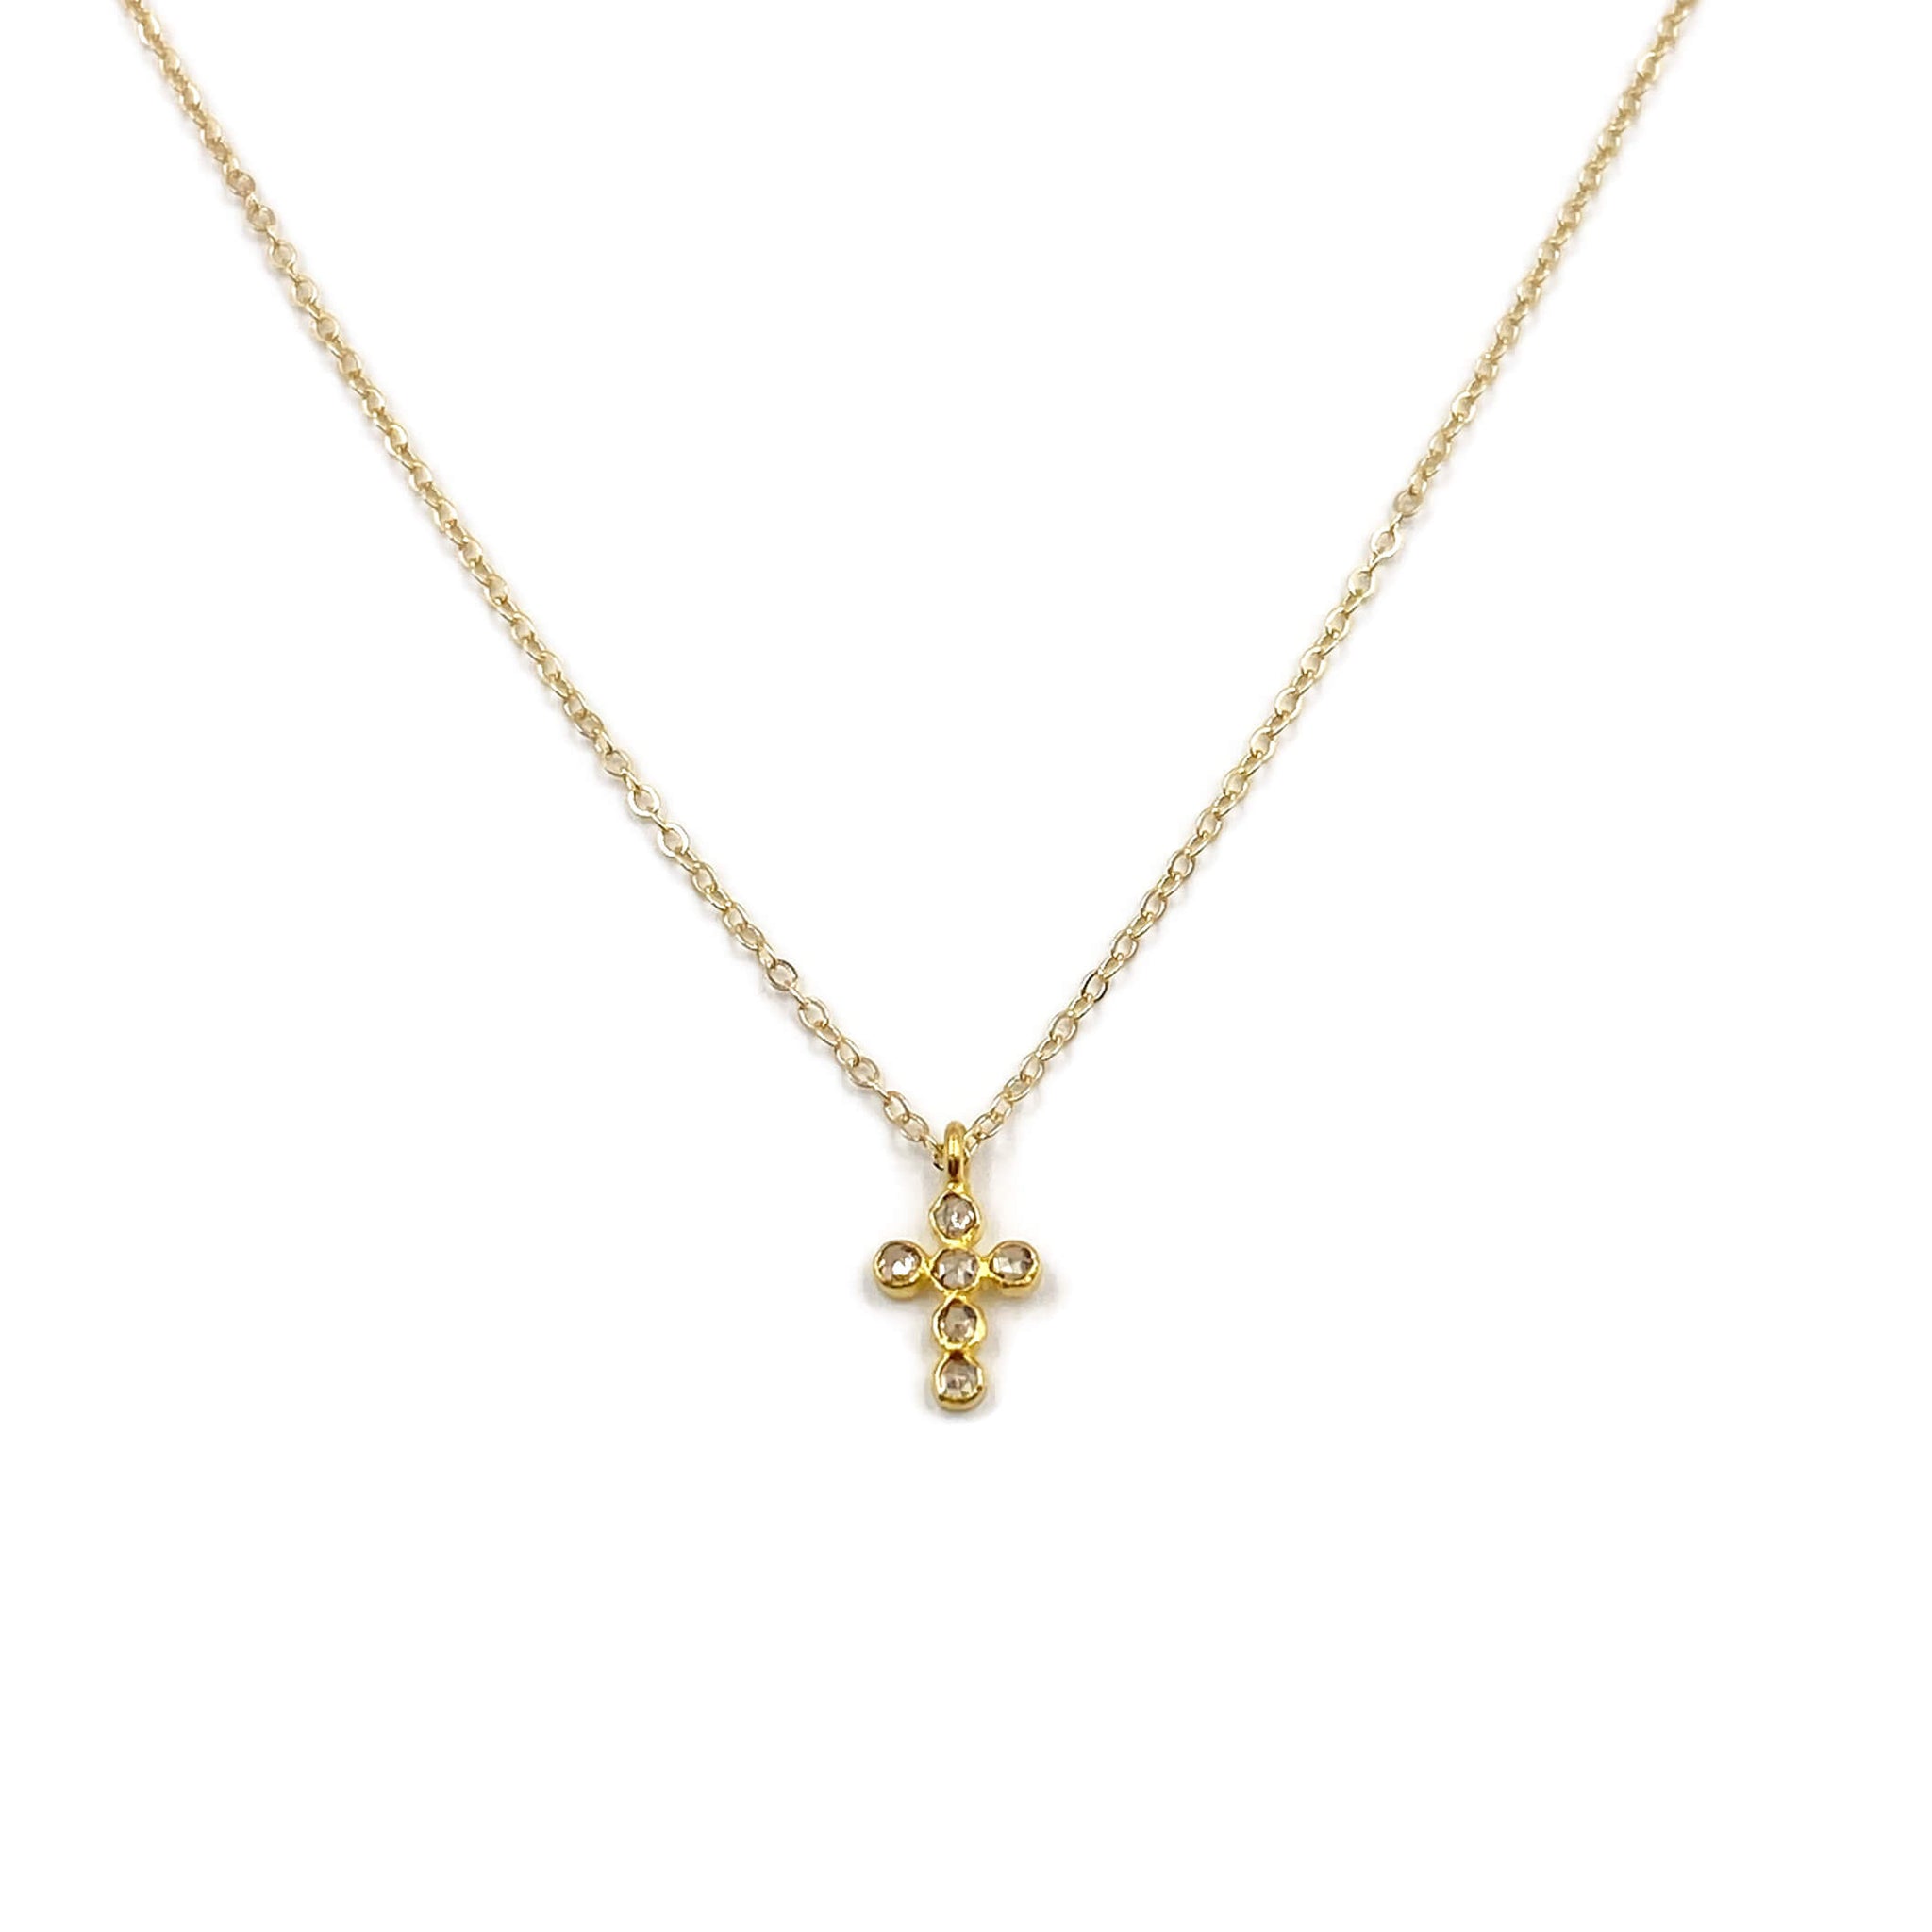 This is a diamond cross necklace that's made of 18k diamond cross and 14k solid gold chain.